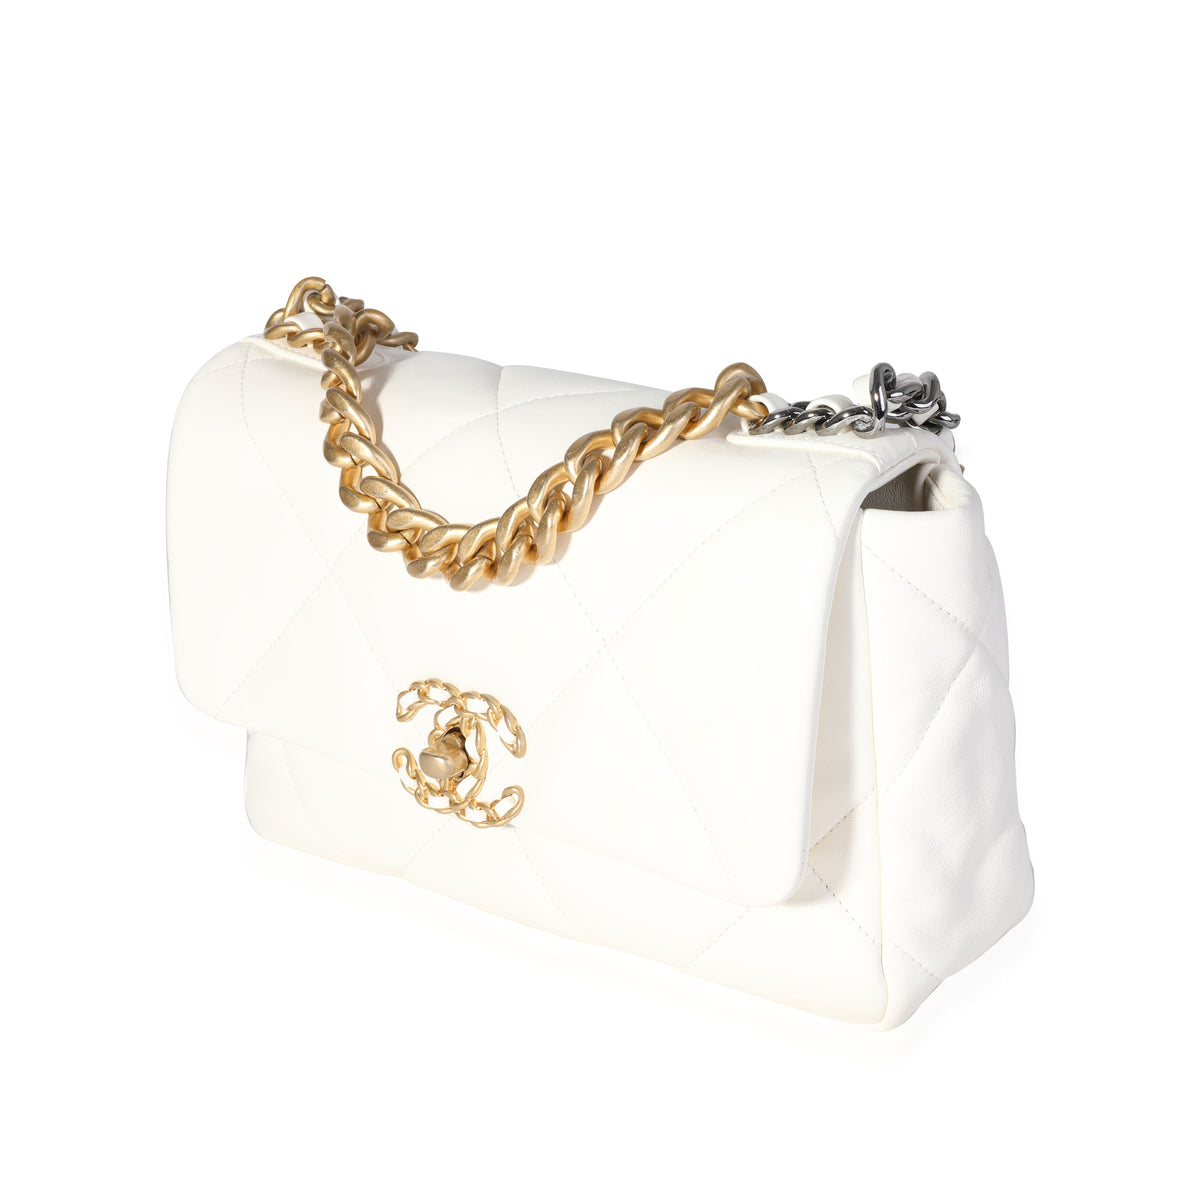 Chanel White Quilted Lambskin Chanel 19 Medium Flap Bag